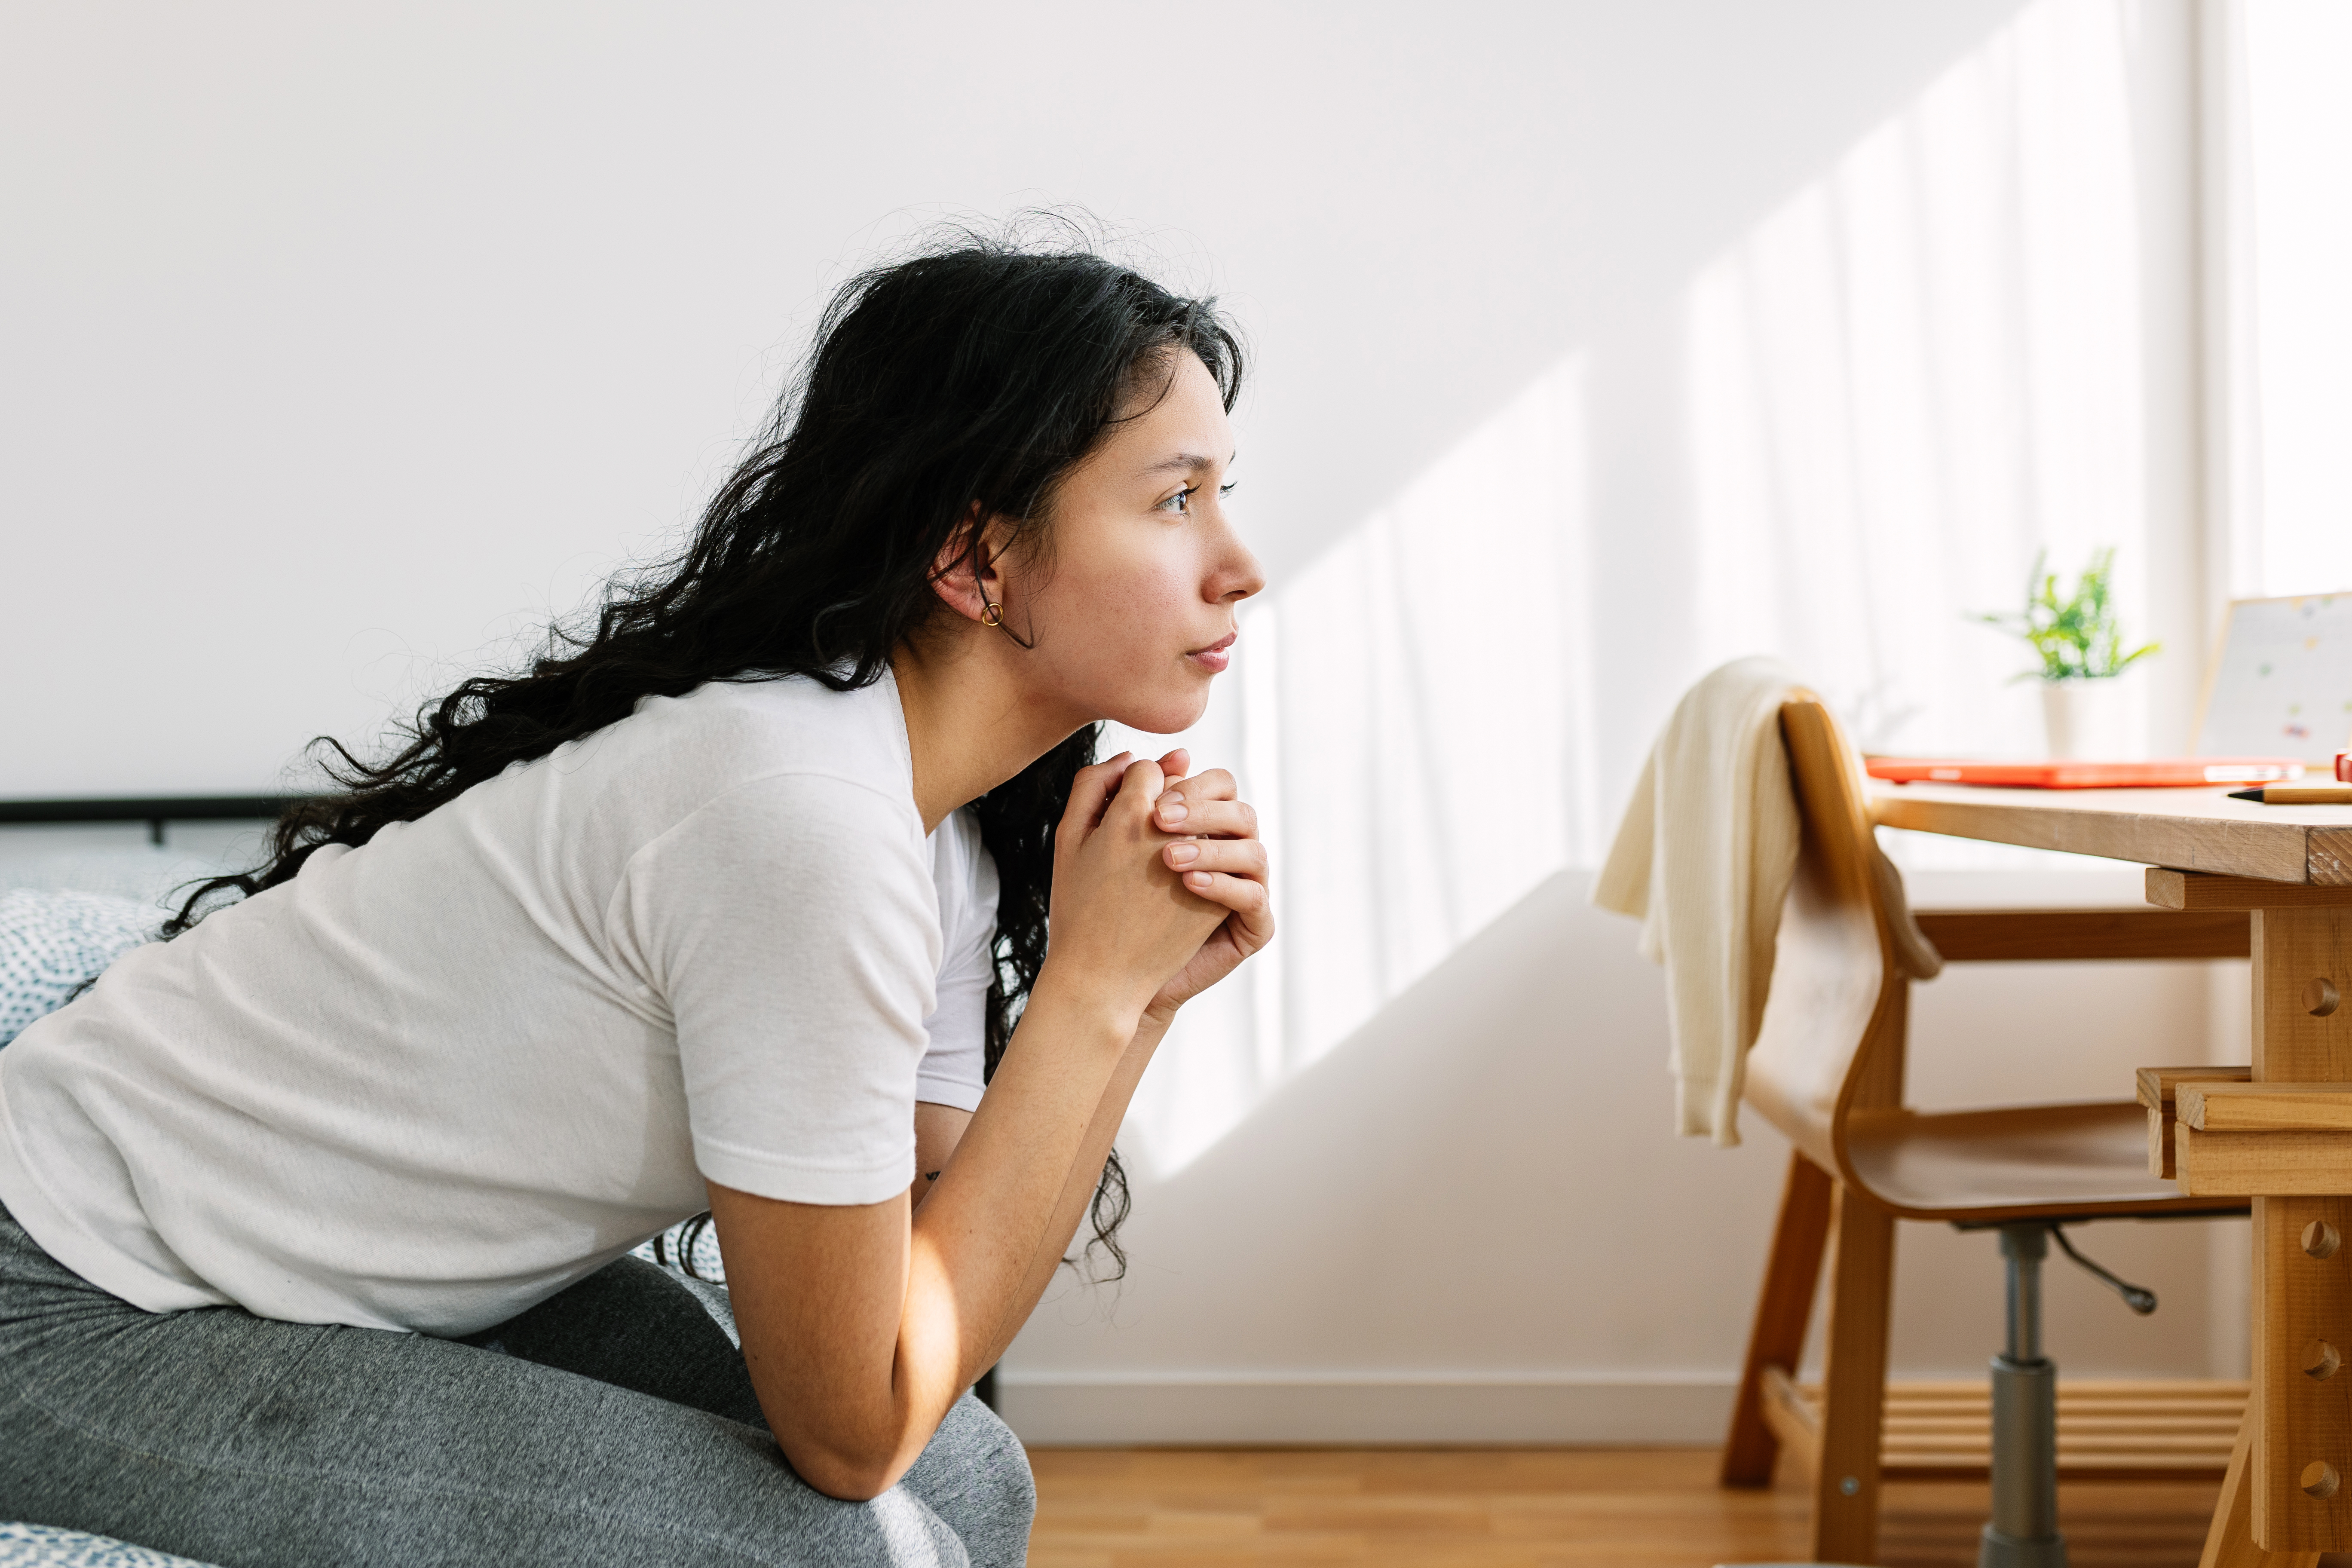 Sad and lonely thoughtful teenage girl looking away sitting on bed in the room. Social issue and adolescence bullying concept | Source: Getty Images